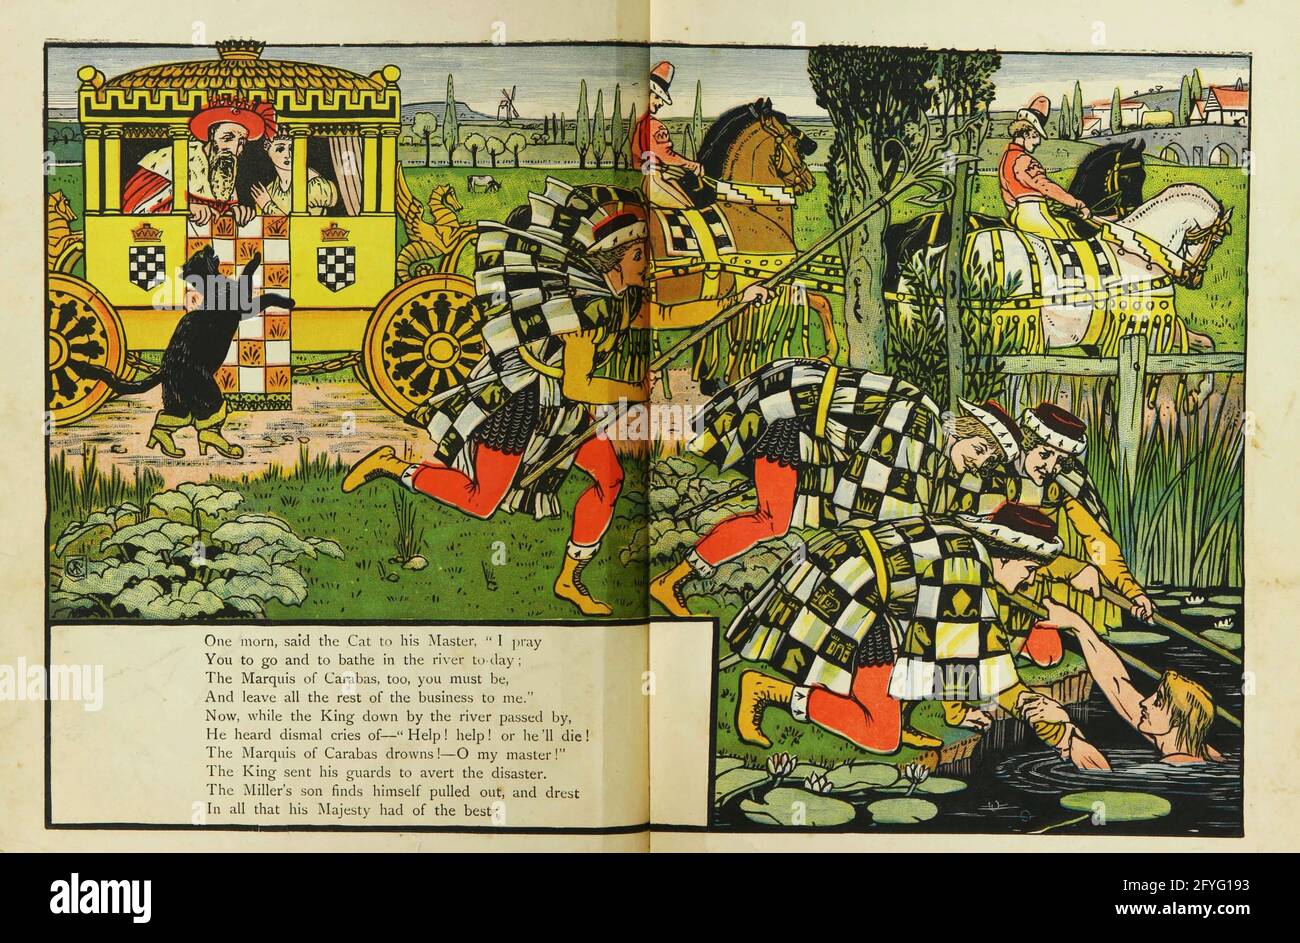 Puss in Boots [Master Cat or the Booted Cat is an Italian and later European literary fairy tale about an anthropomorphic cat who uses trickery and deceit to gain power, wealth, and the hand of a princess in marriage for his penniless and low-born master.] From the Book The Marquis of Carabas' picture book : containing Puss in Boots, Old Mother Hubbard, Valentine and Orson, the absurd ABC. Illustrated by Walter Crane, Edmund Evans, and Sarah Catherine Martin. Publisher London (The Broadway, Ludgate) ; New York (416 Broome Street) : George Routledge and Sons in 1874 Stock Photo